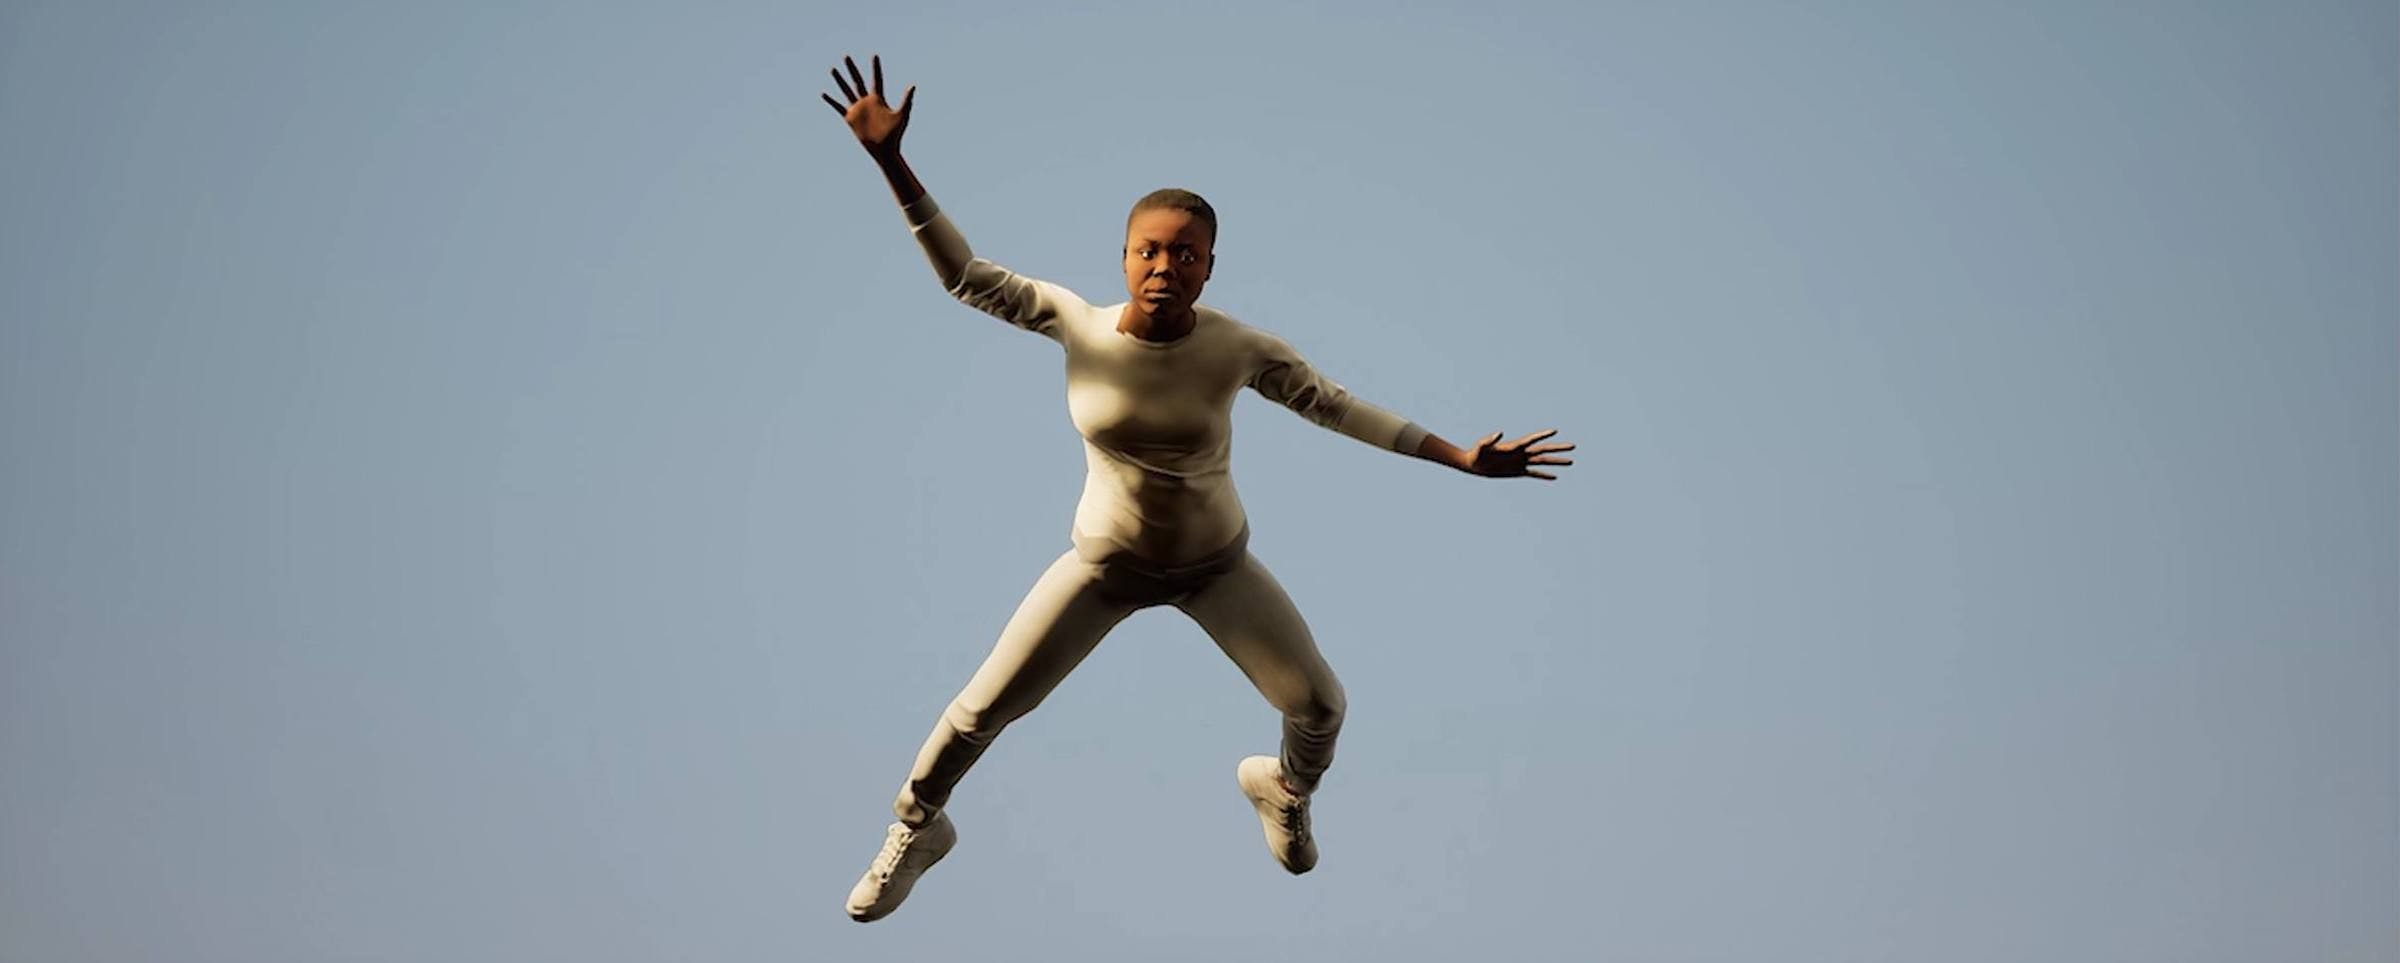 Computer-generated image of a person wearing white clothes free-falling towards the camera with their limbs splayed.